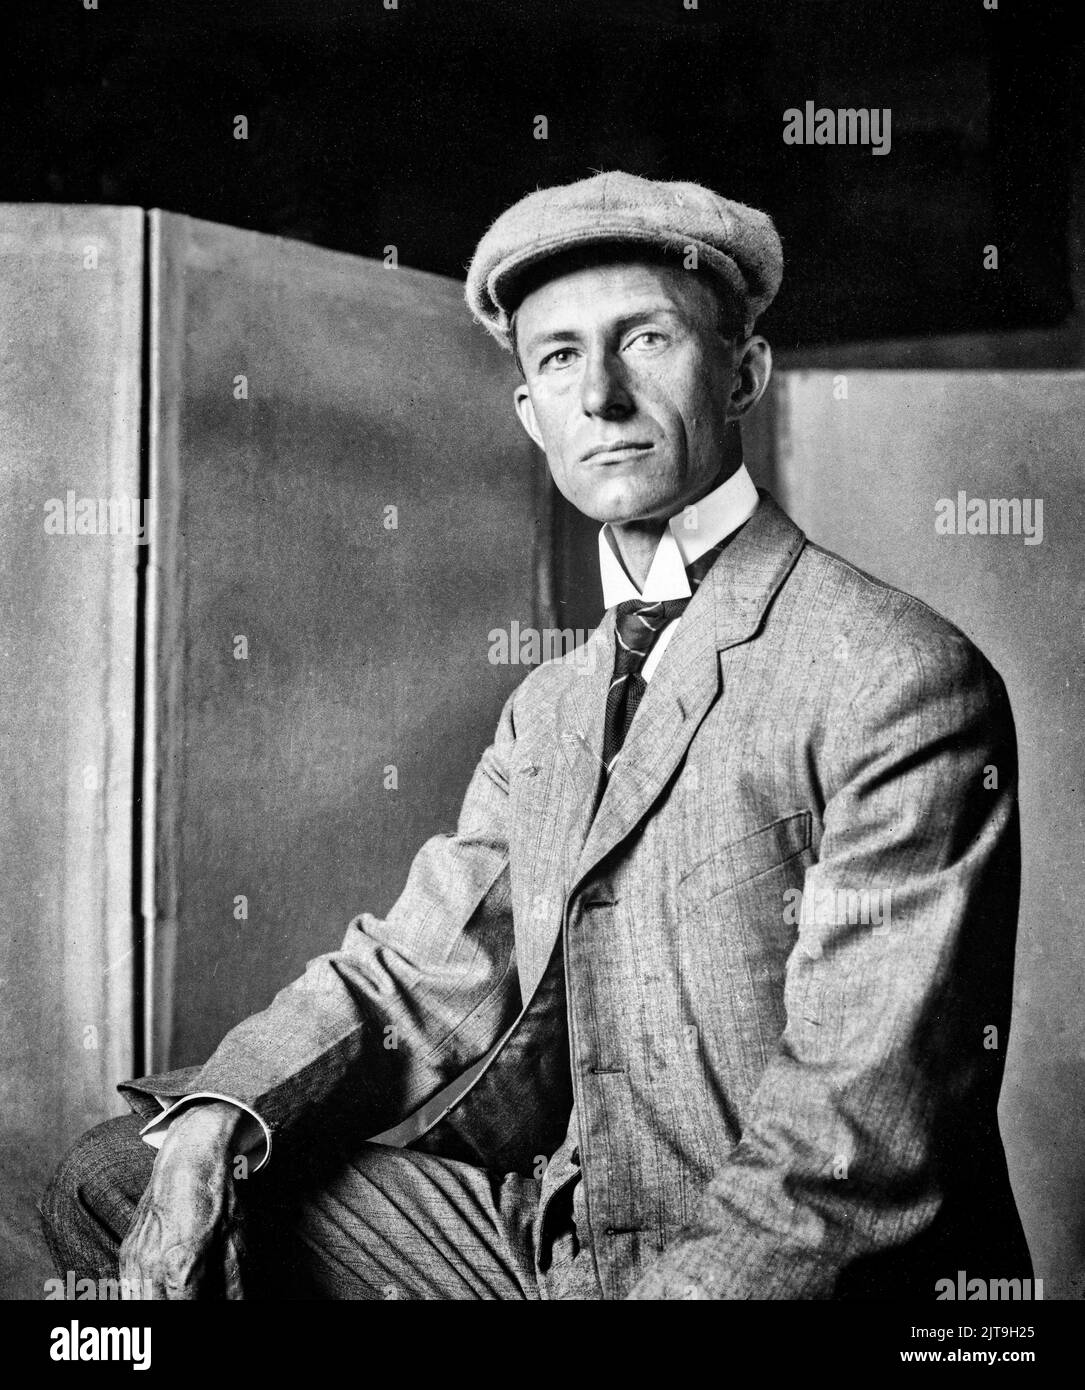 A portrait of Wilbur Wright (1867-1912), who with his brother Orville, together known as the Wright brothers, were American aviation pioneers generally credited with inventing, building, and flying the world's first successful motor-operated airplane. They made the first controlled, sustained flight of a powered, heavier-than-air aircraft with the Wright Flyer on December 17, 1903, 4 mi (6 km) south of Kitty Hawk, North Carolina. Stock Photo